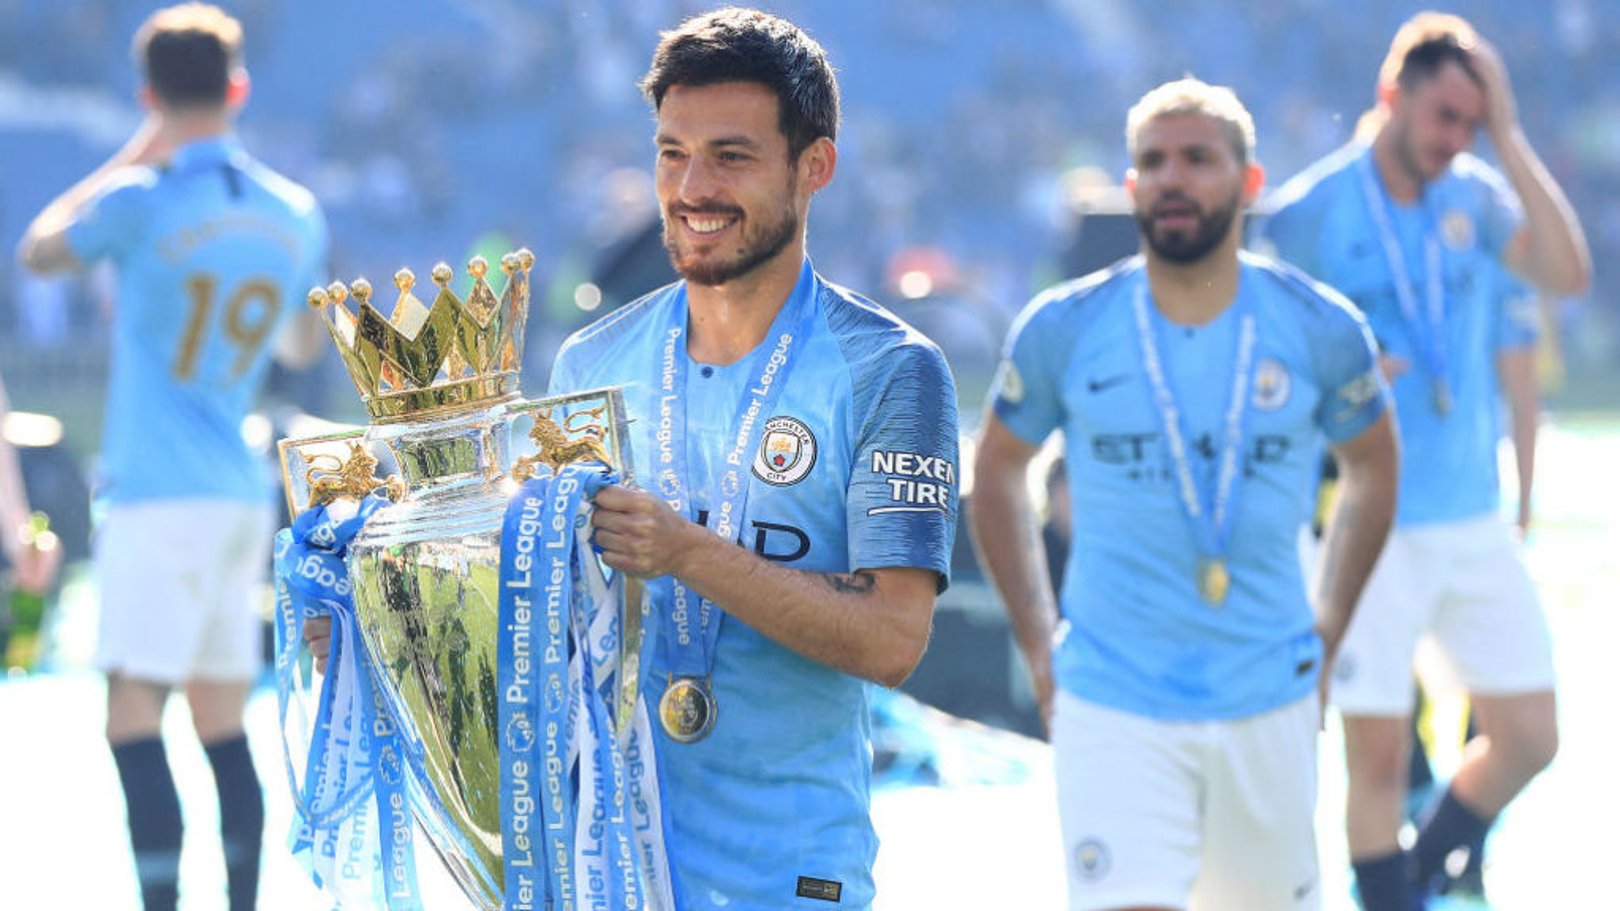 SILVA SERVICE: David has played 400 games in a Manchester City shirt